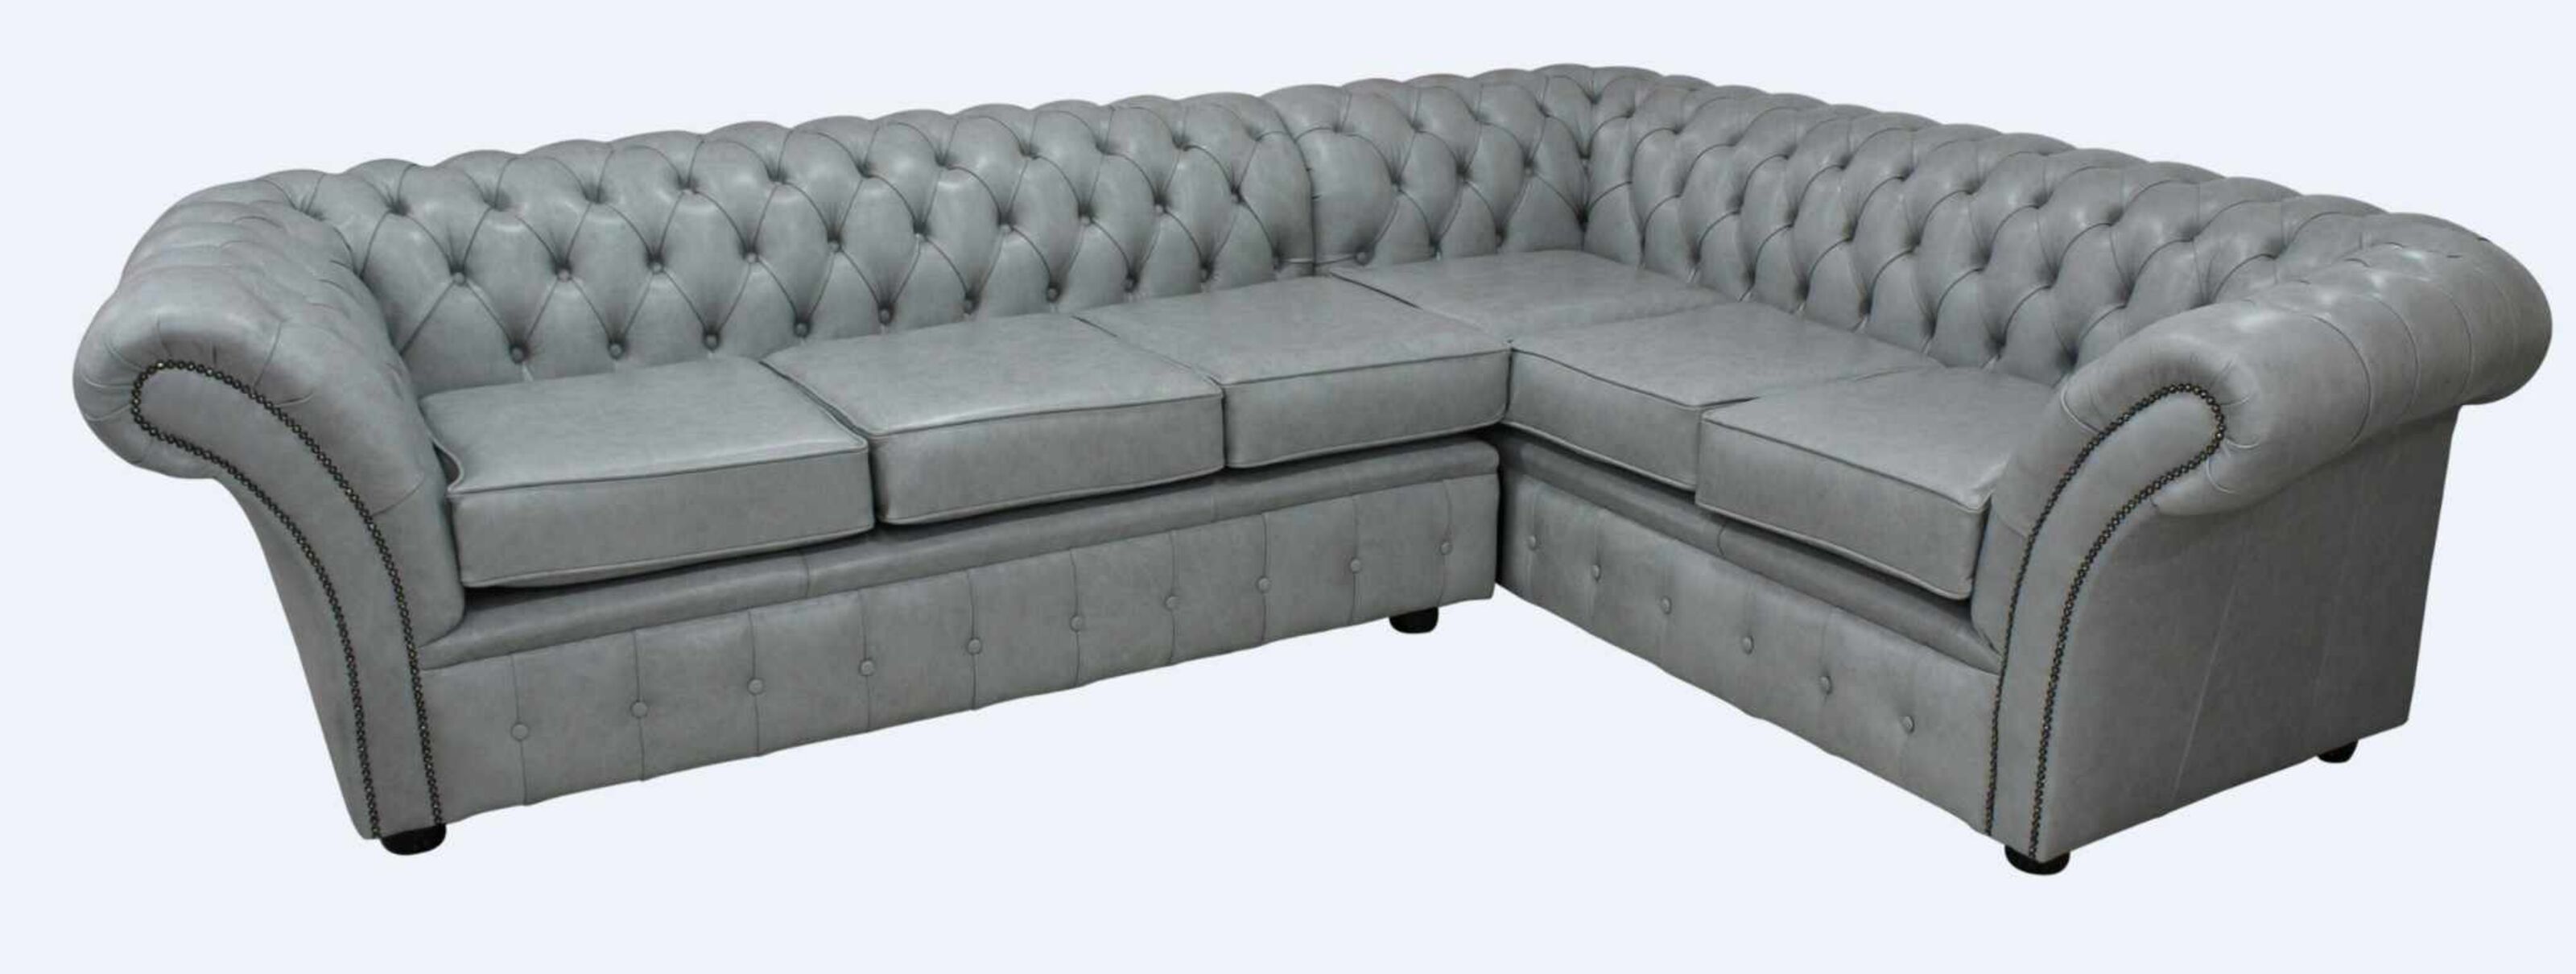 Get Cozy and Chic with Our Fabulous Range of Large Corner Sofas  %Post Title